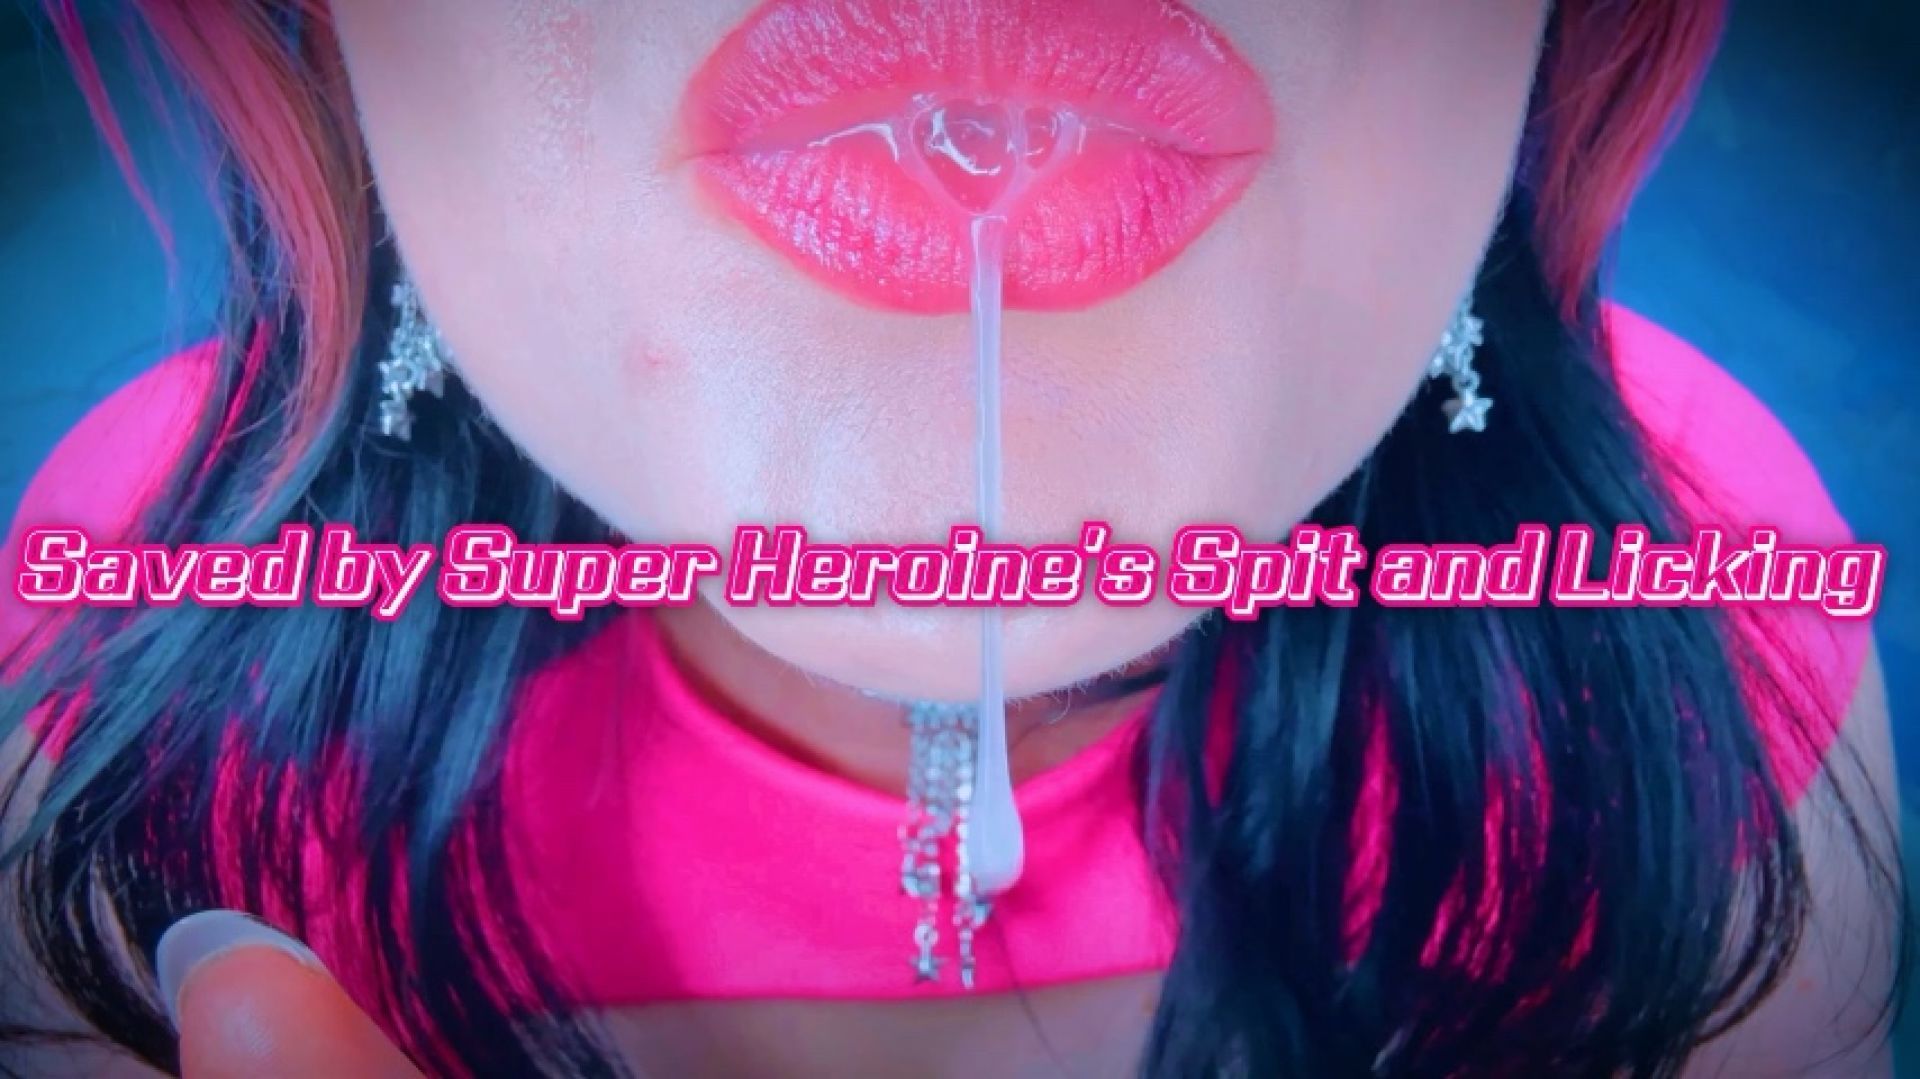 Saved by Super Heroine's Spit and Licking